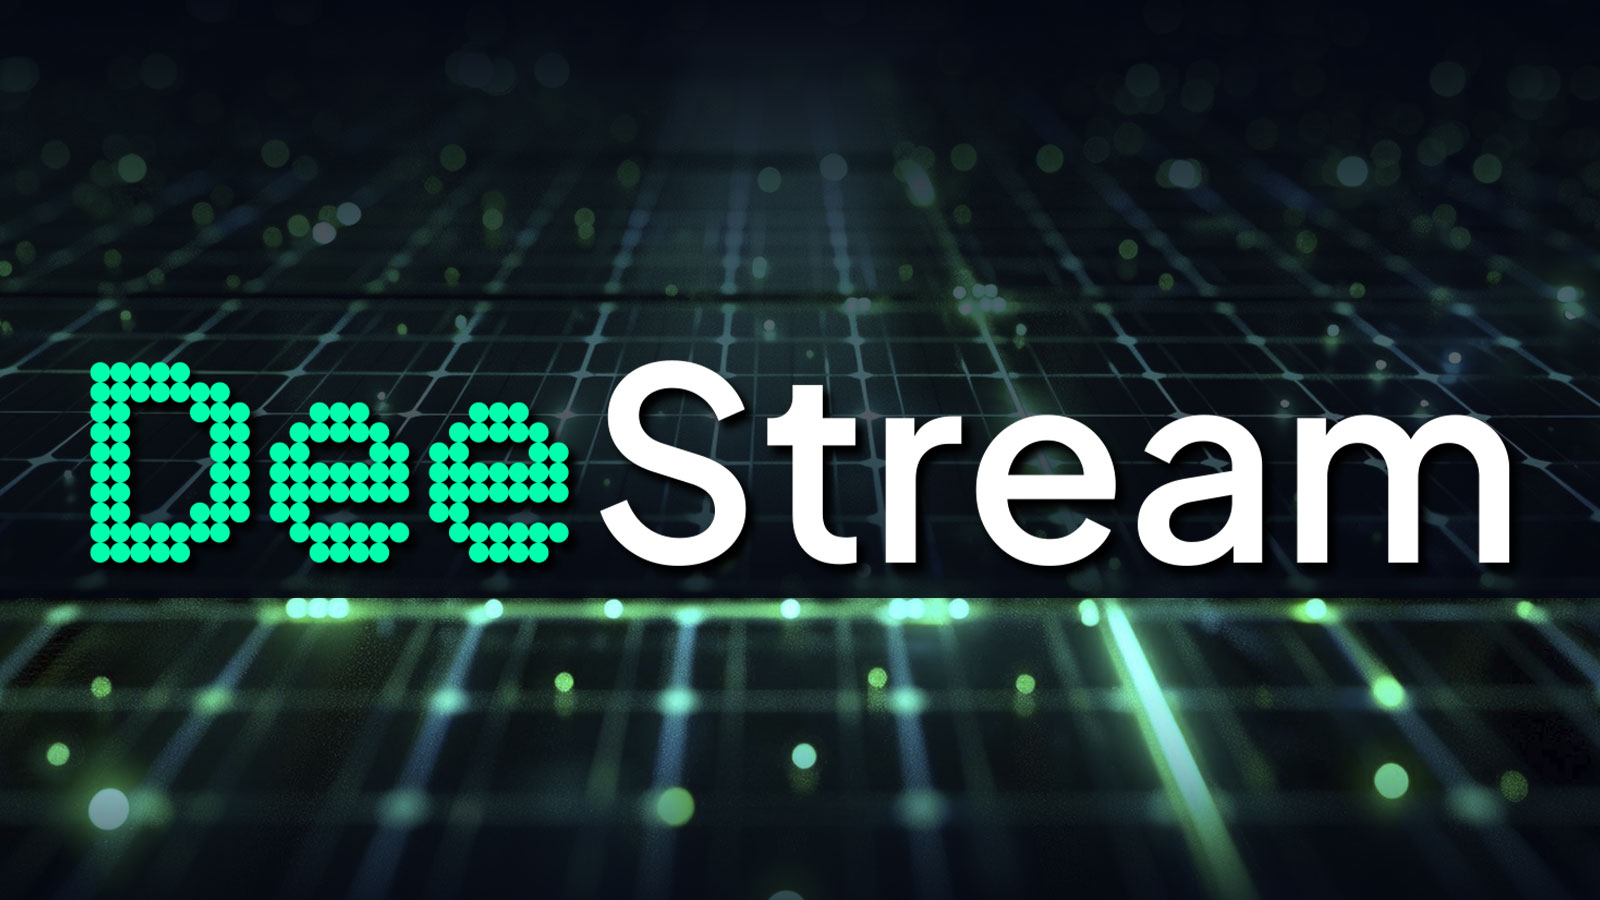 DeeStream (DST) Token Release in Focus in Q1, 2024 as Chainlink (LINK), Polkadot (DOT) Target Trading Volume Records